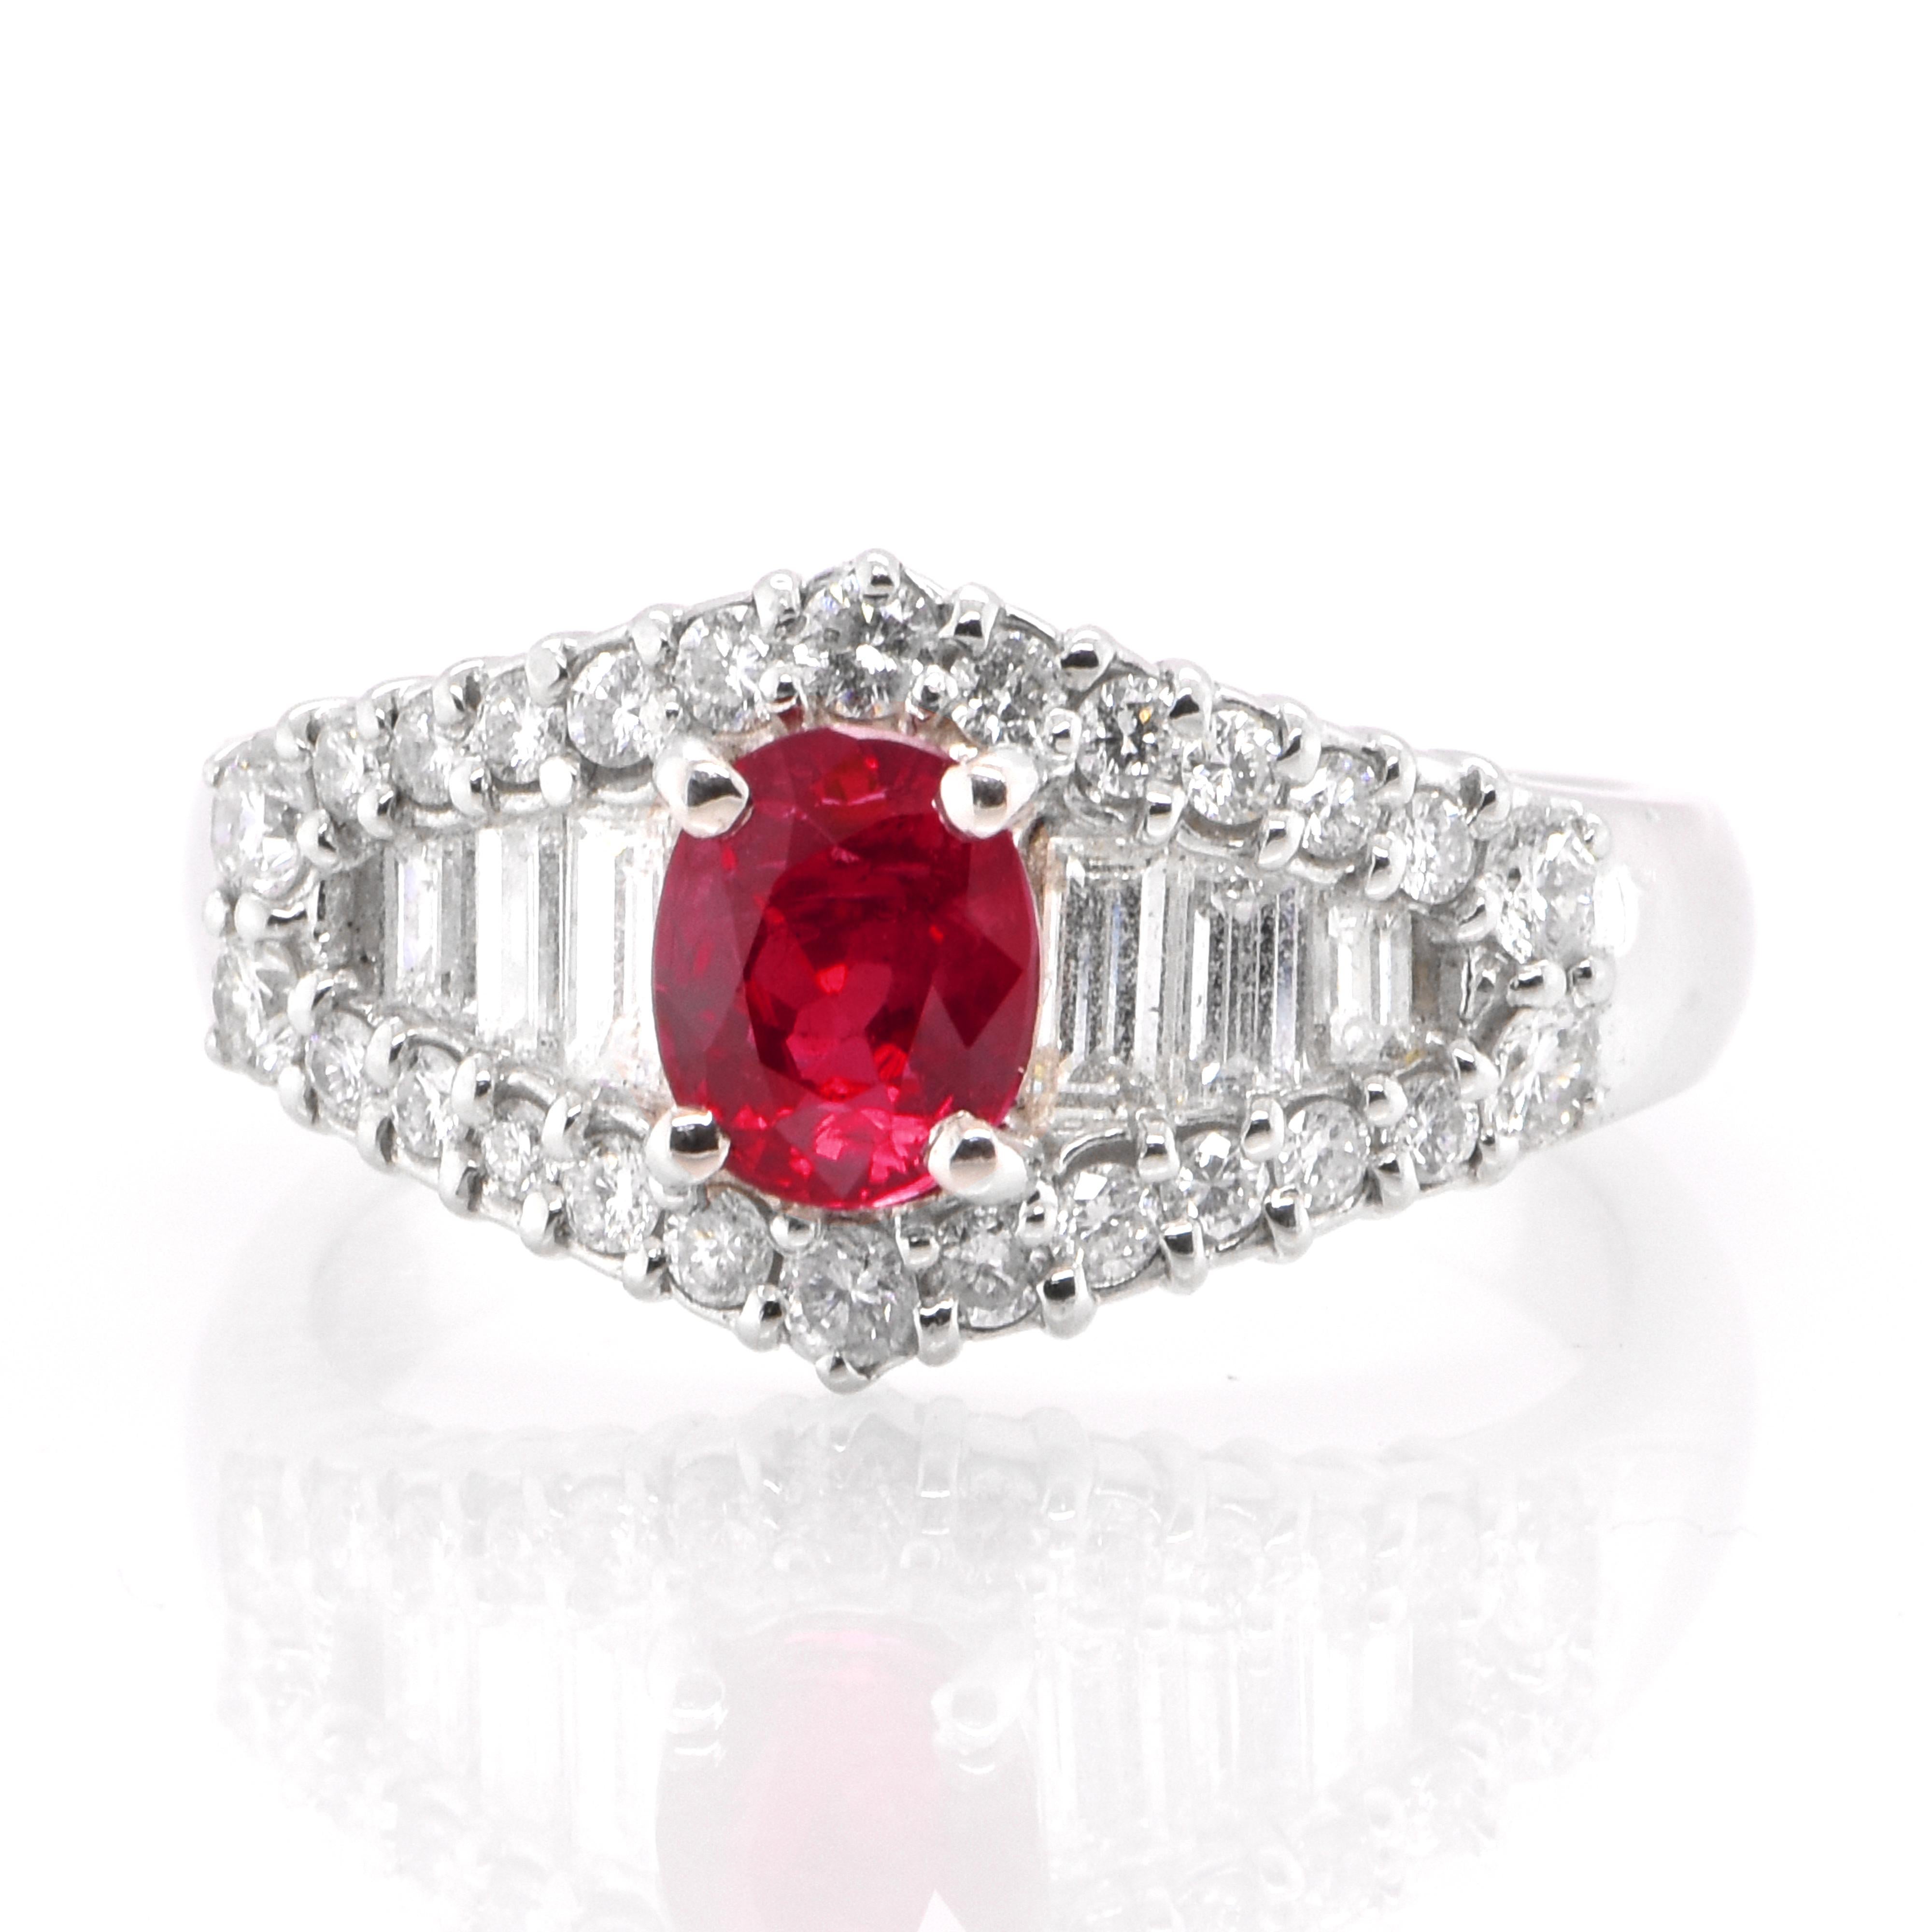 A beautiful ring set in Platinum featuring a 1.02 Carat Natural Ruby and 0.94 Carat Diamonds. Rubies are referred to as 